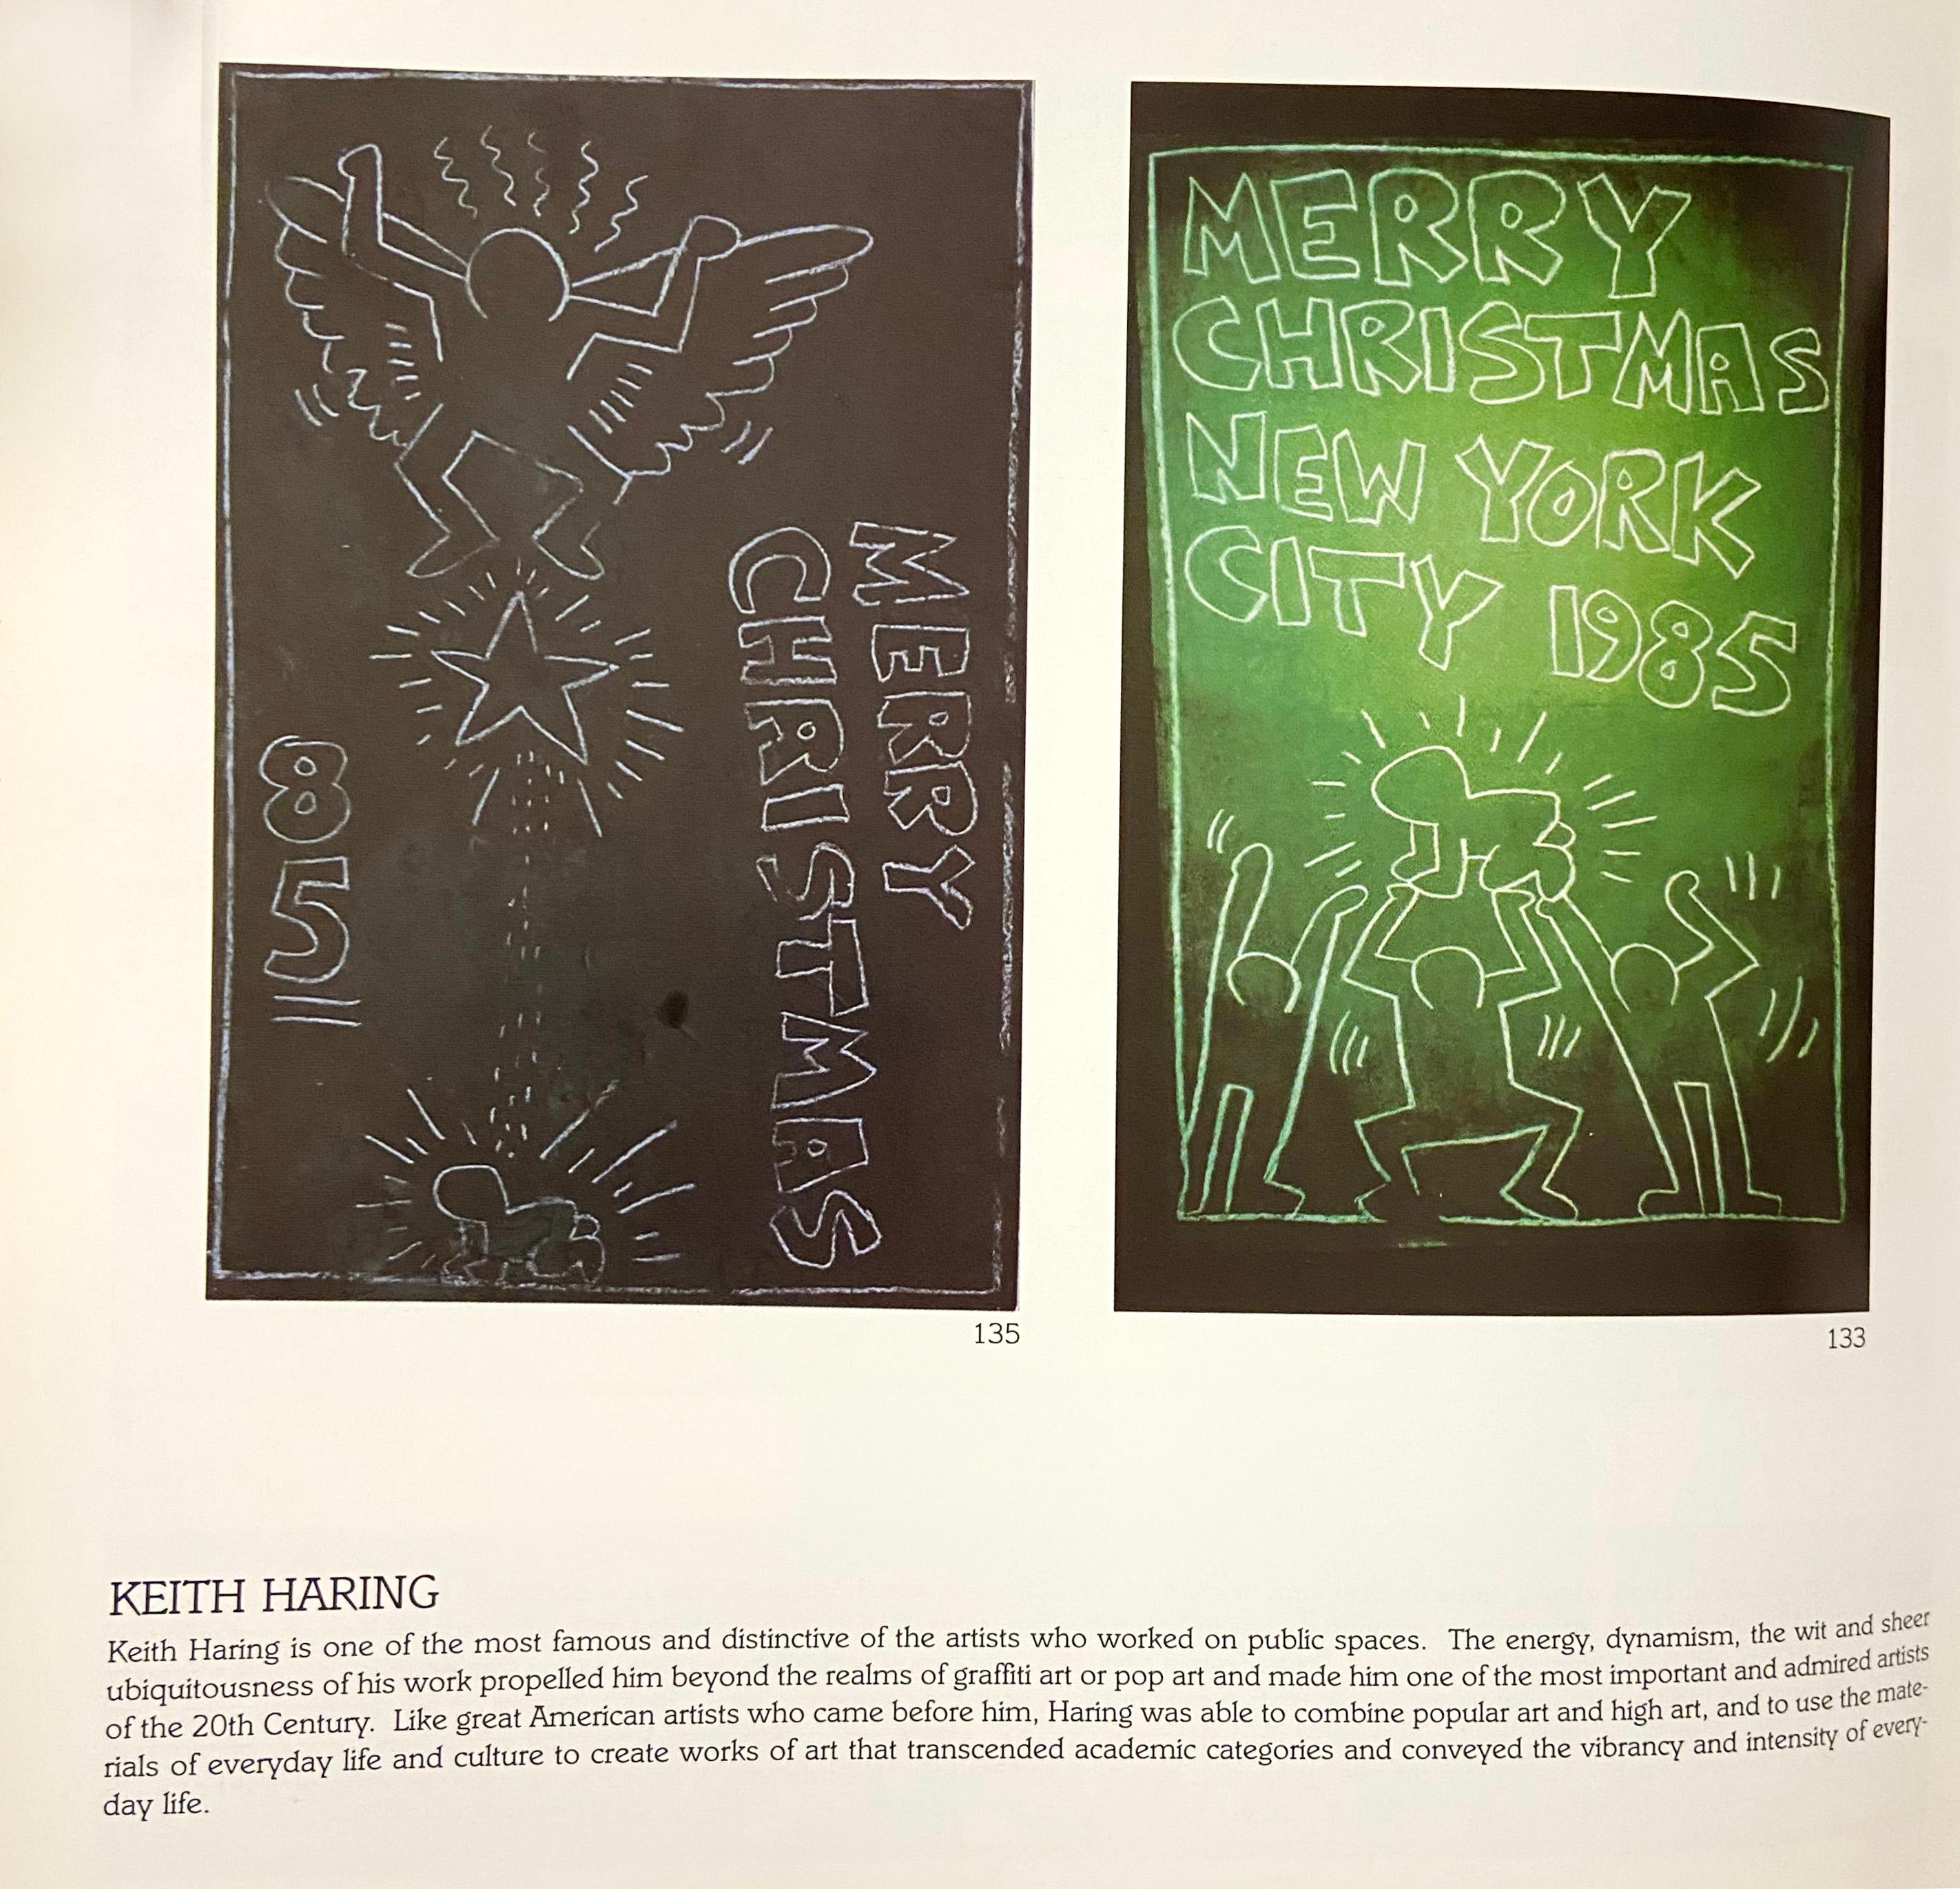 Guernsey's Graffiti Auction Catalog 2000:
Original exhibition catalog to the seminal 2000 Guernsey’s graffiti art auction featuring works by Jean-Michel Basquiat, Keith Haring, KAWS, BLADE, Lady Pink, Martha Cooper, Henry Chalfant, Kenny Scharf,